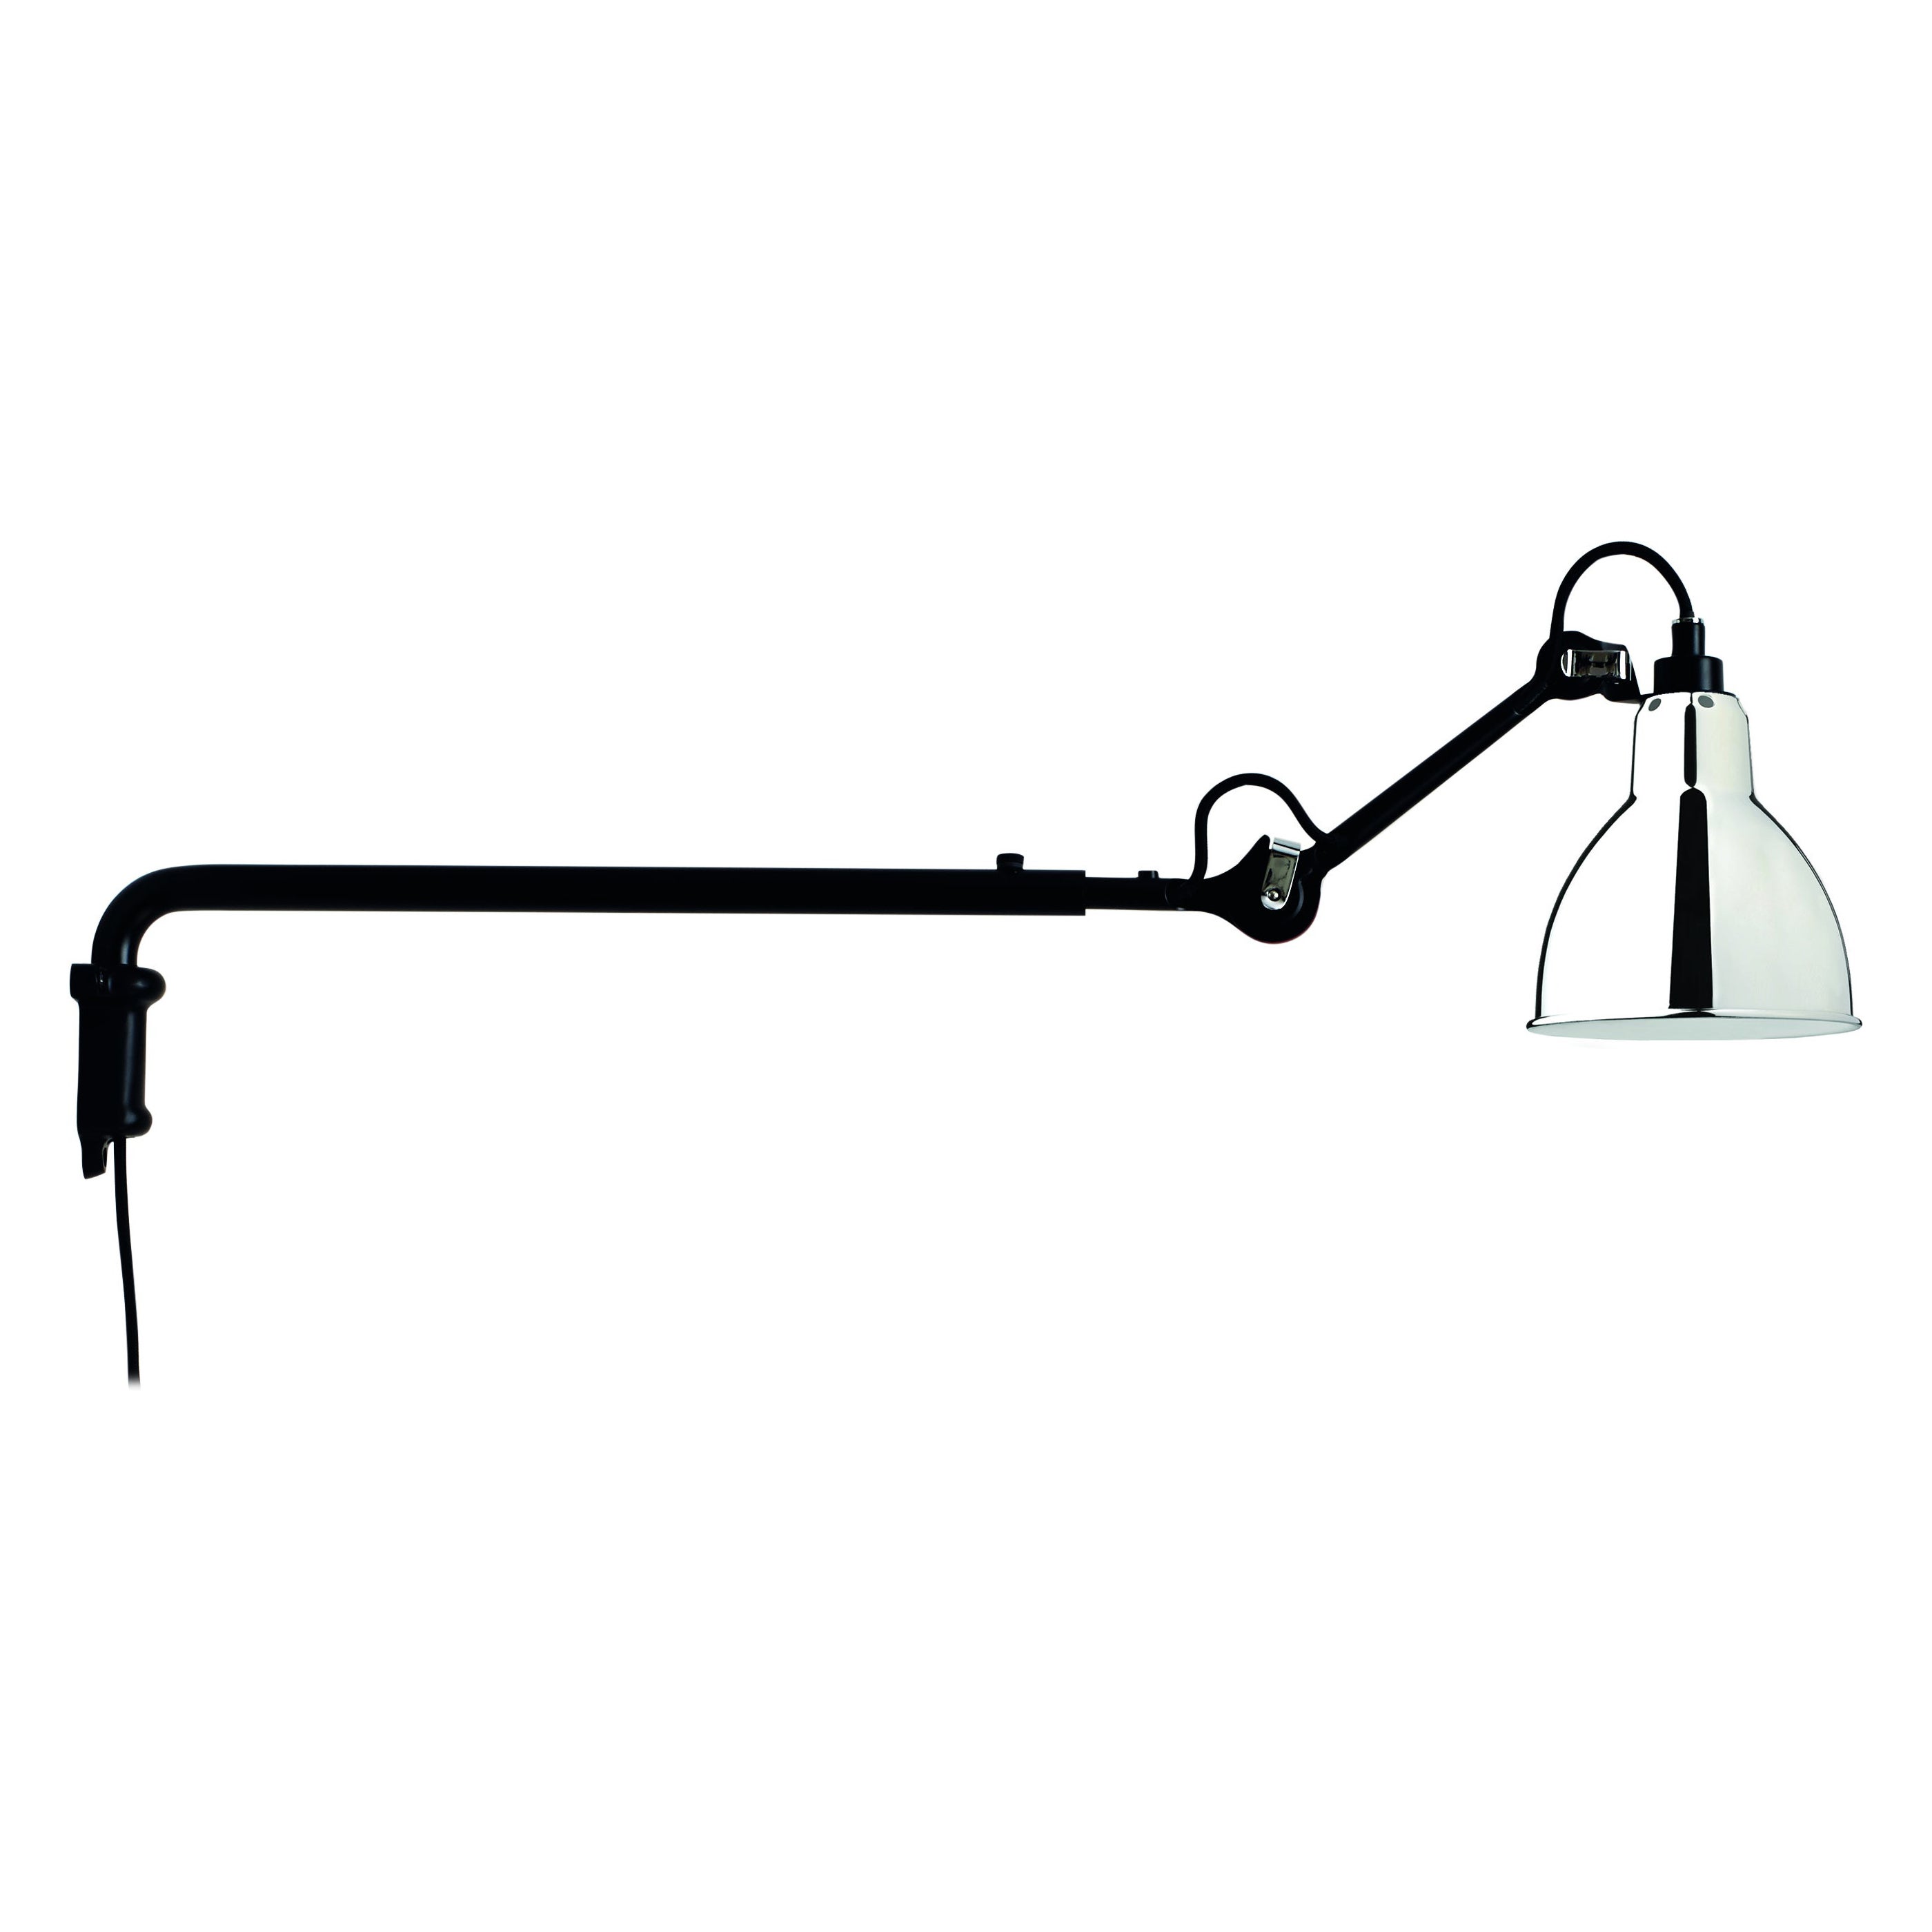 DCW Editions La Lampe Gras N°203 Wall Lamp in Black Steel Arm and Chrome Shade For Sale